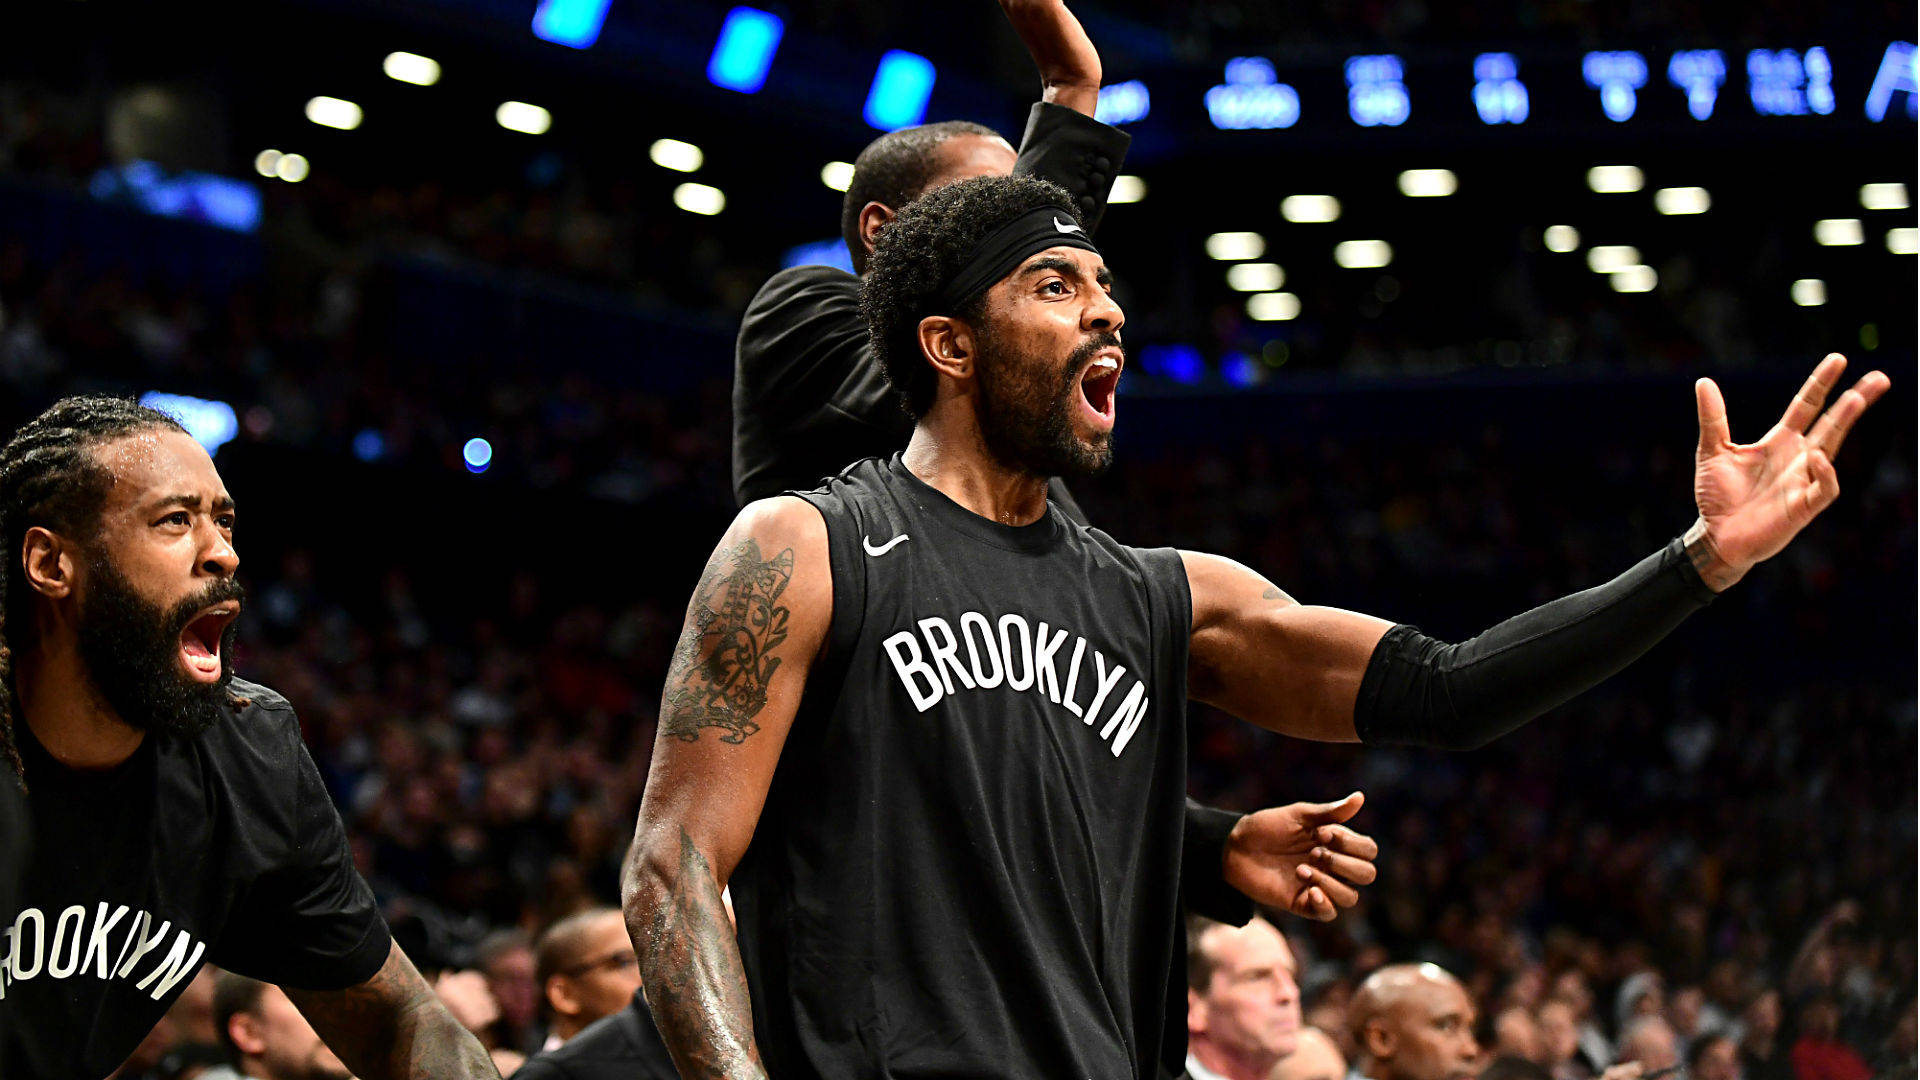 Exciting Brooklyn Nets Game Background